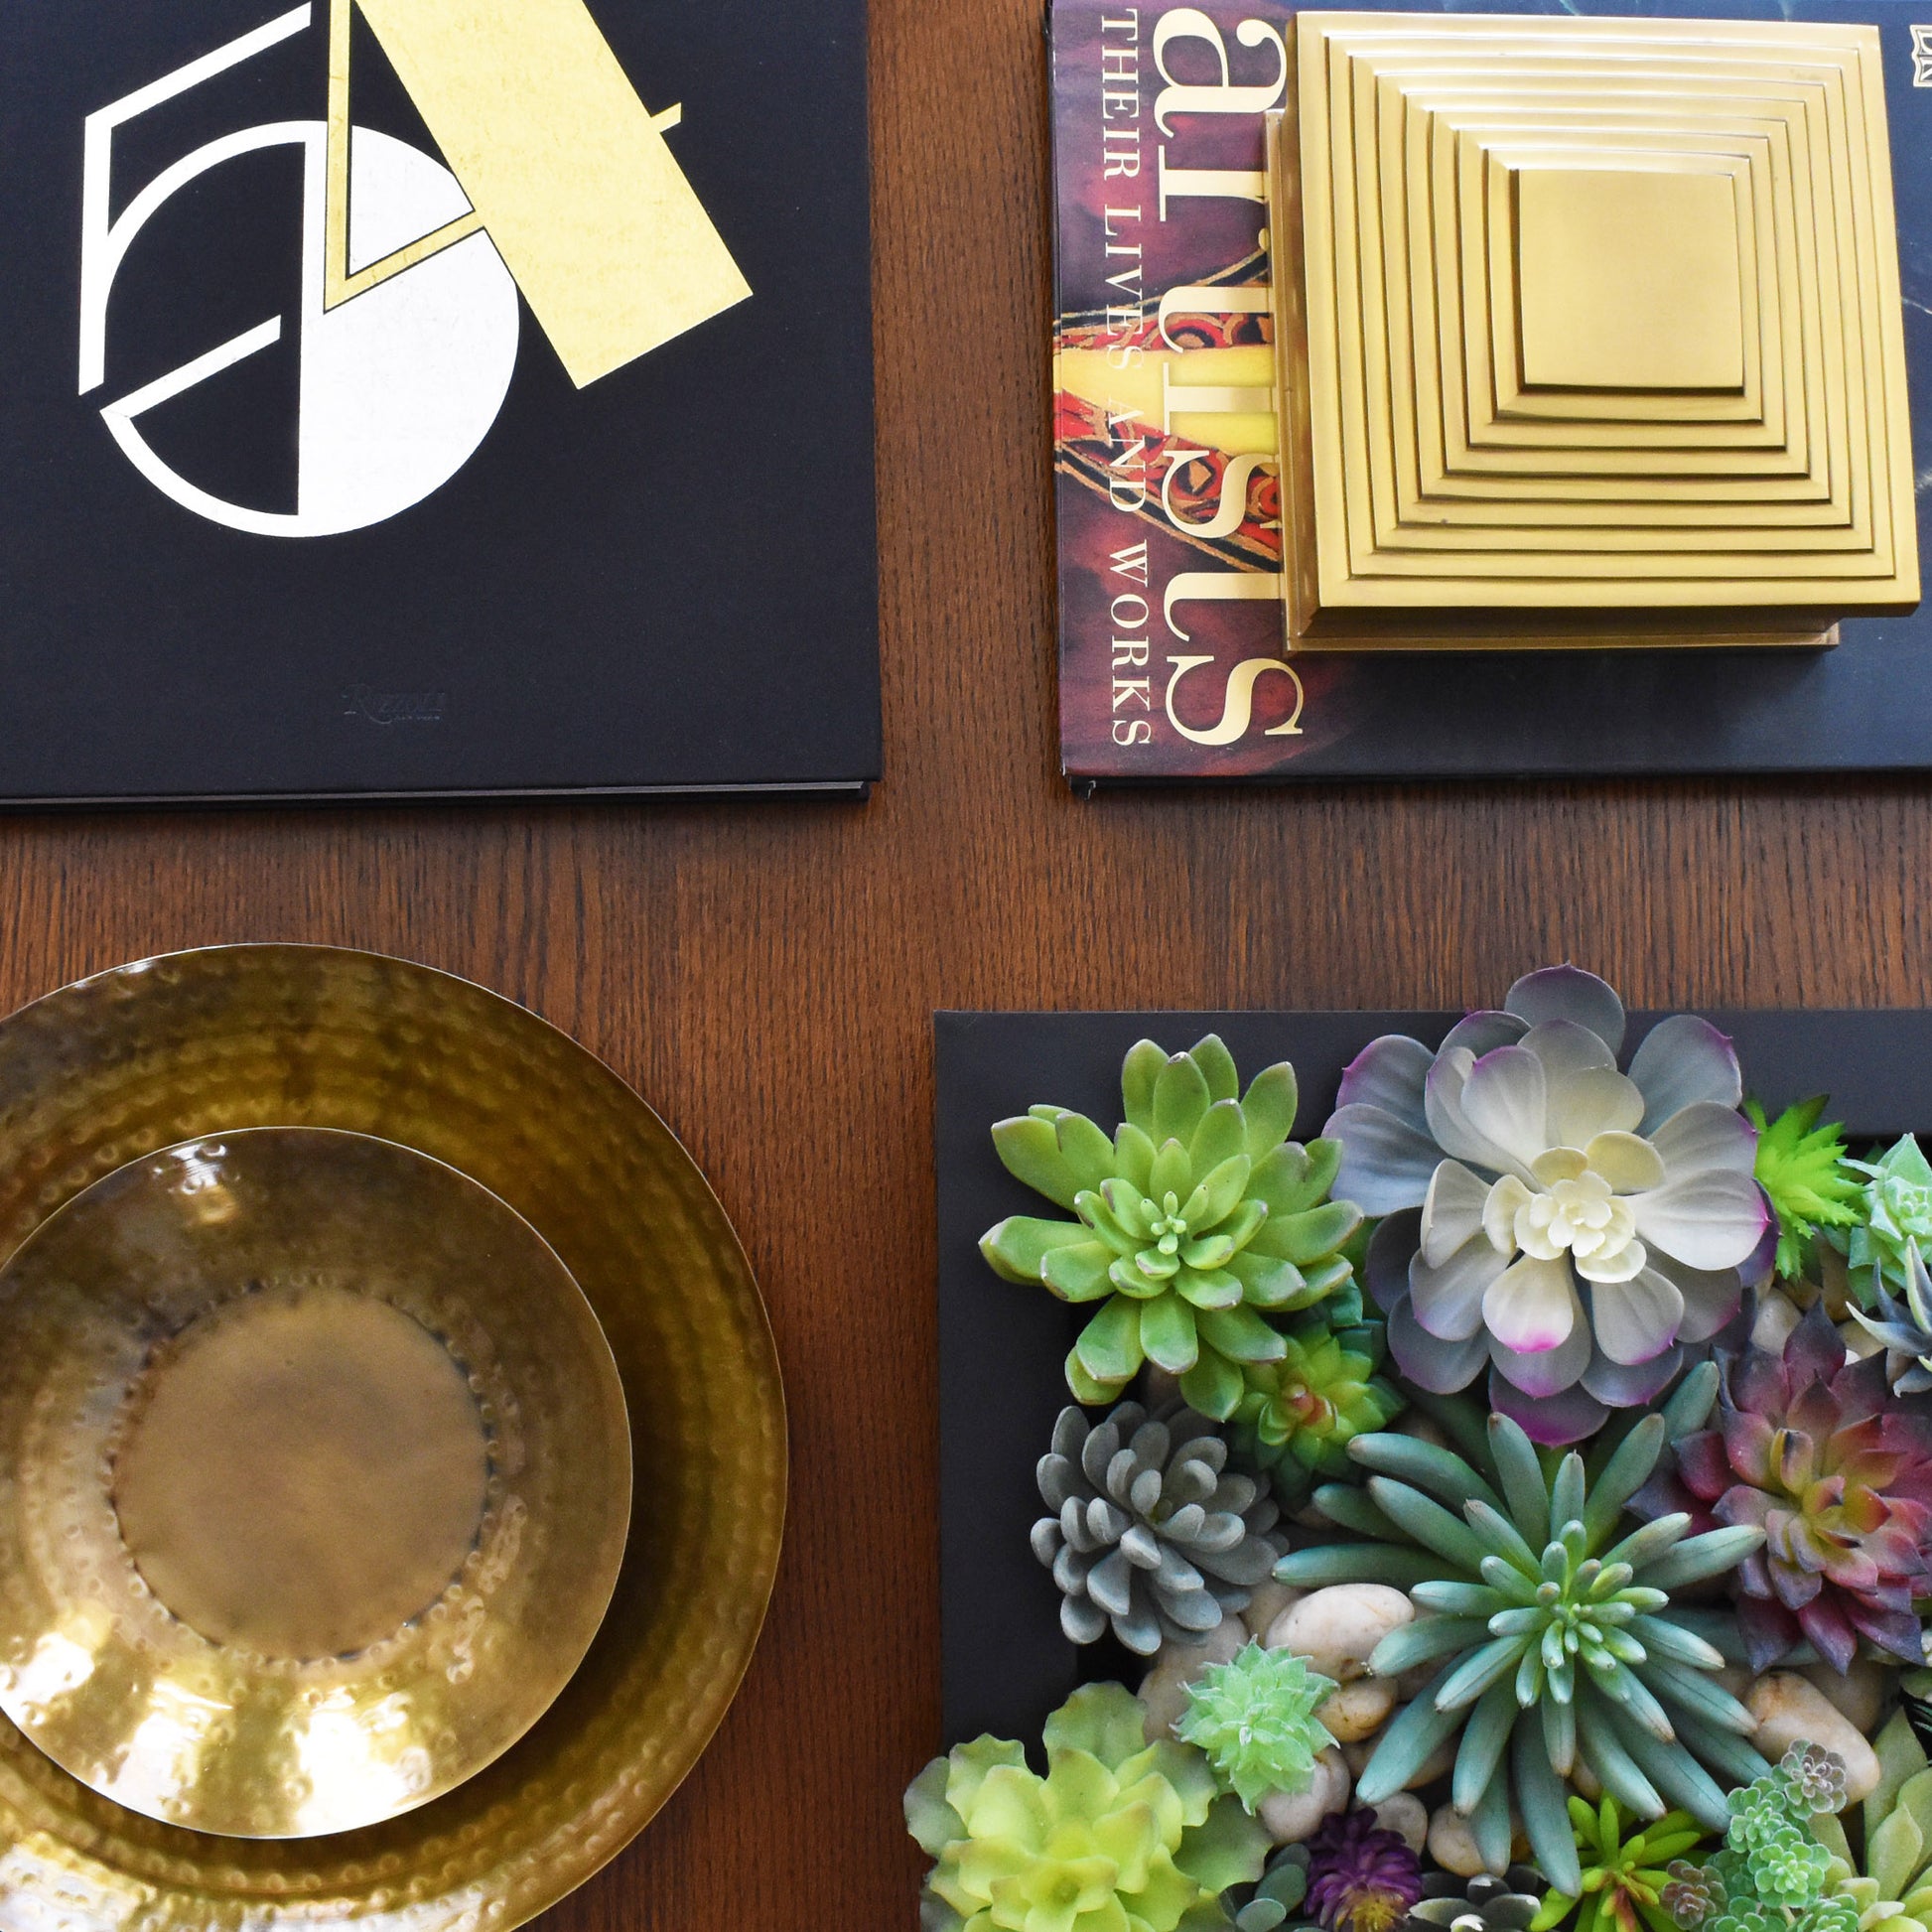 Nested antique brass finish trays, black metal tray with succulents, Studio 54 book, and brass pyramid box on oak coffee table.